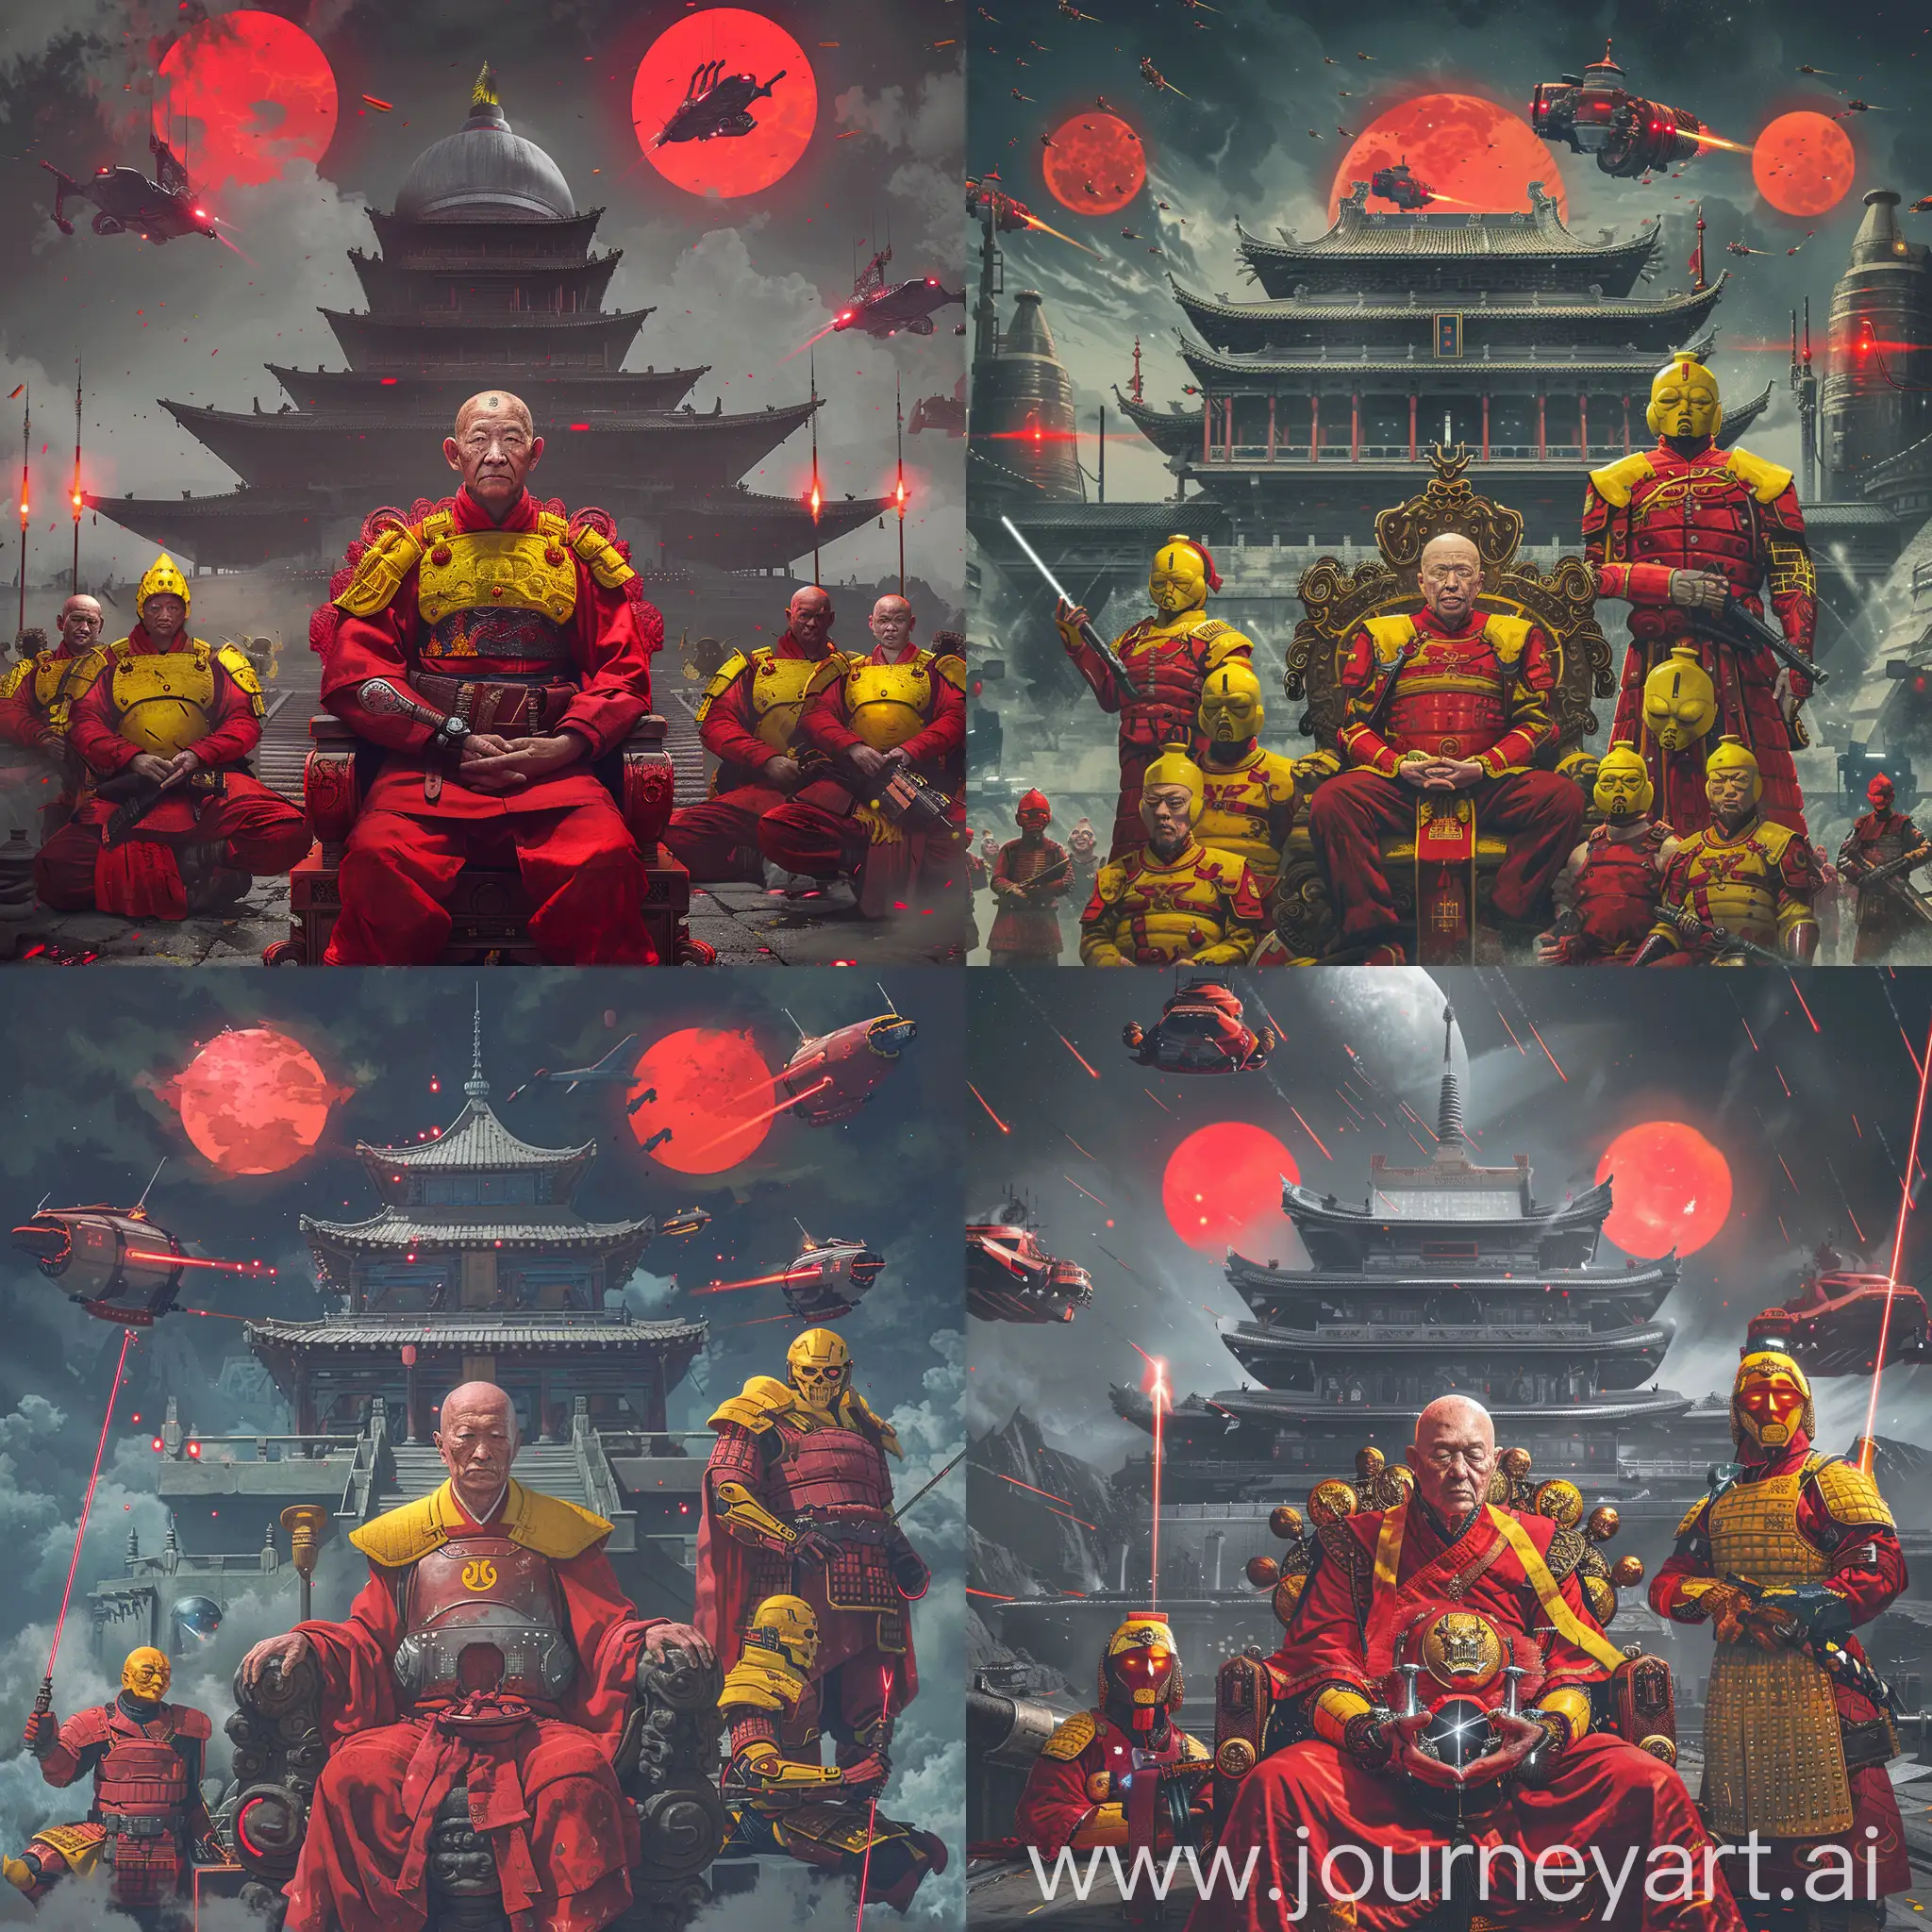 Elder-Chinese-Buddhist-Monk-in-Cybernetic-Armor-with-Warrior-Disciples-in-Futuristic-Temple